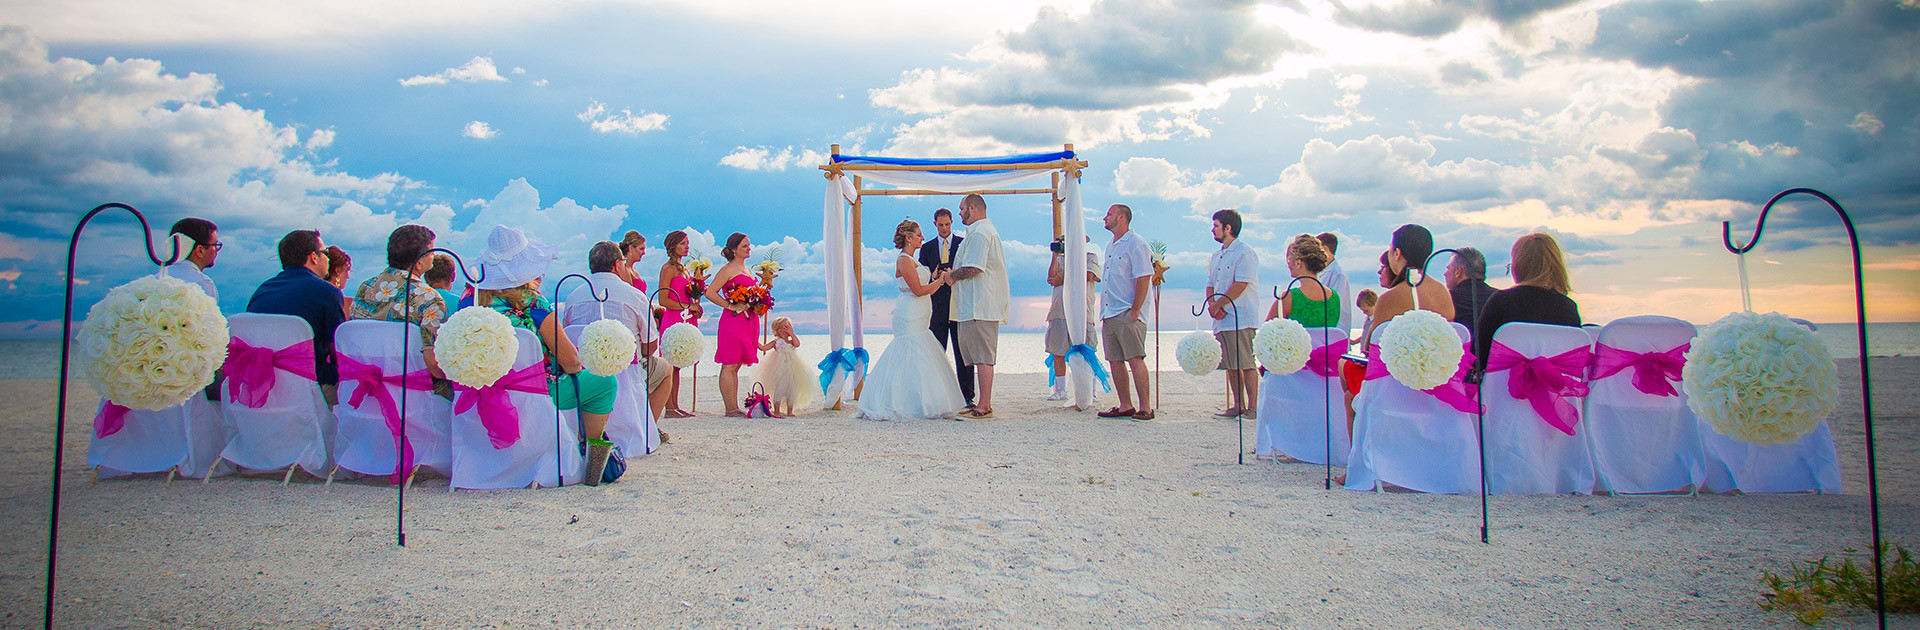 Beach Wedding Packages In Florida
 Florida Beach Wedding Packages 727 475 2272